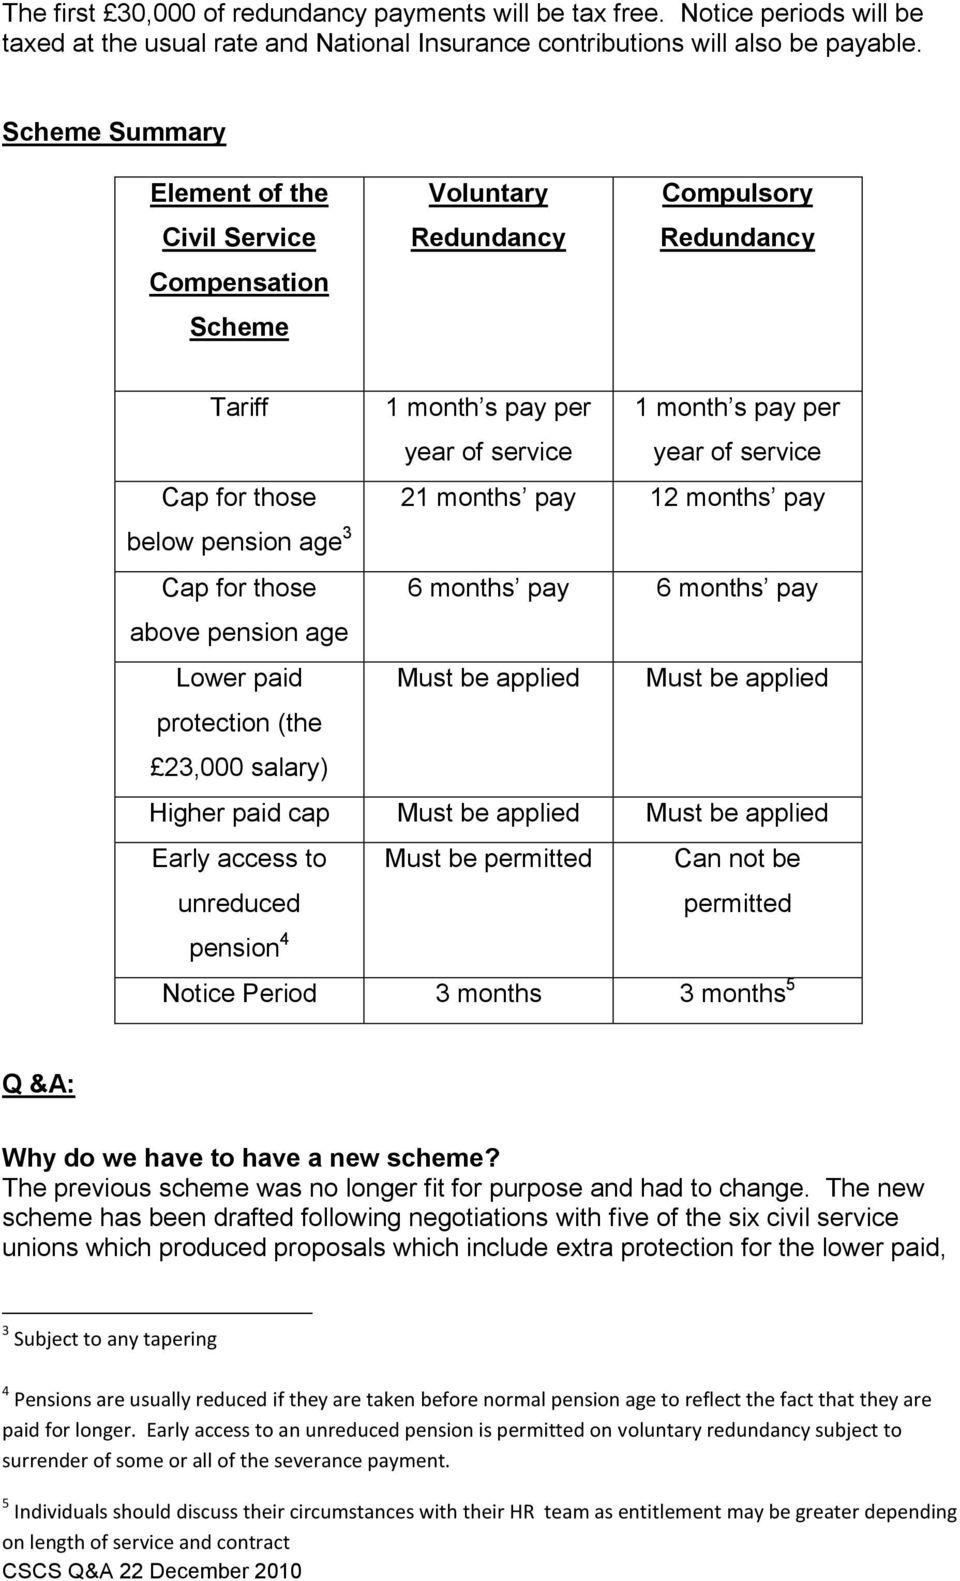 months pay 12 months pay below pension age 3 Cap for those 6 months pay 6 months pay above pension age Lower paid protection (the 23,000 salary) Must be applied Must be applied Higher paid cap Must